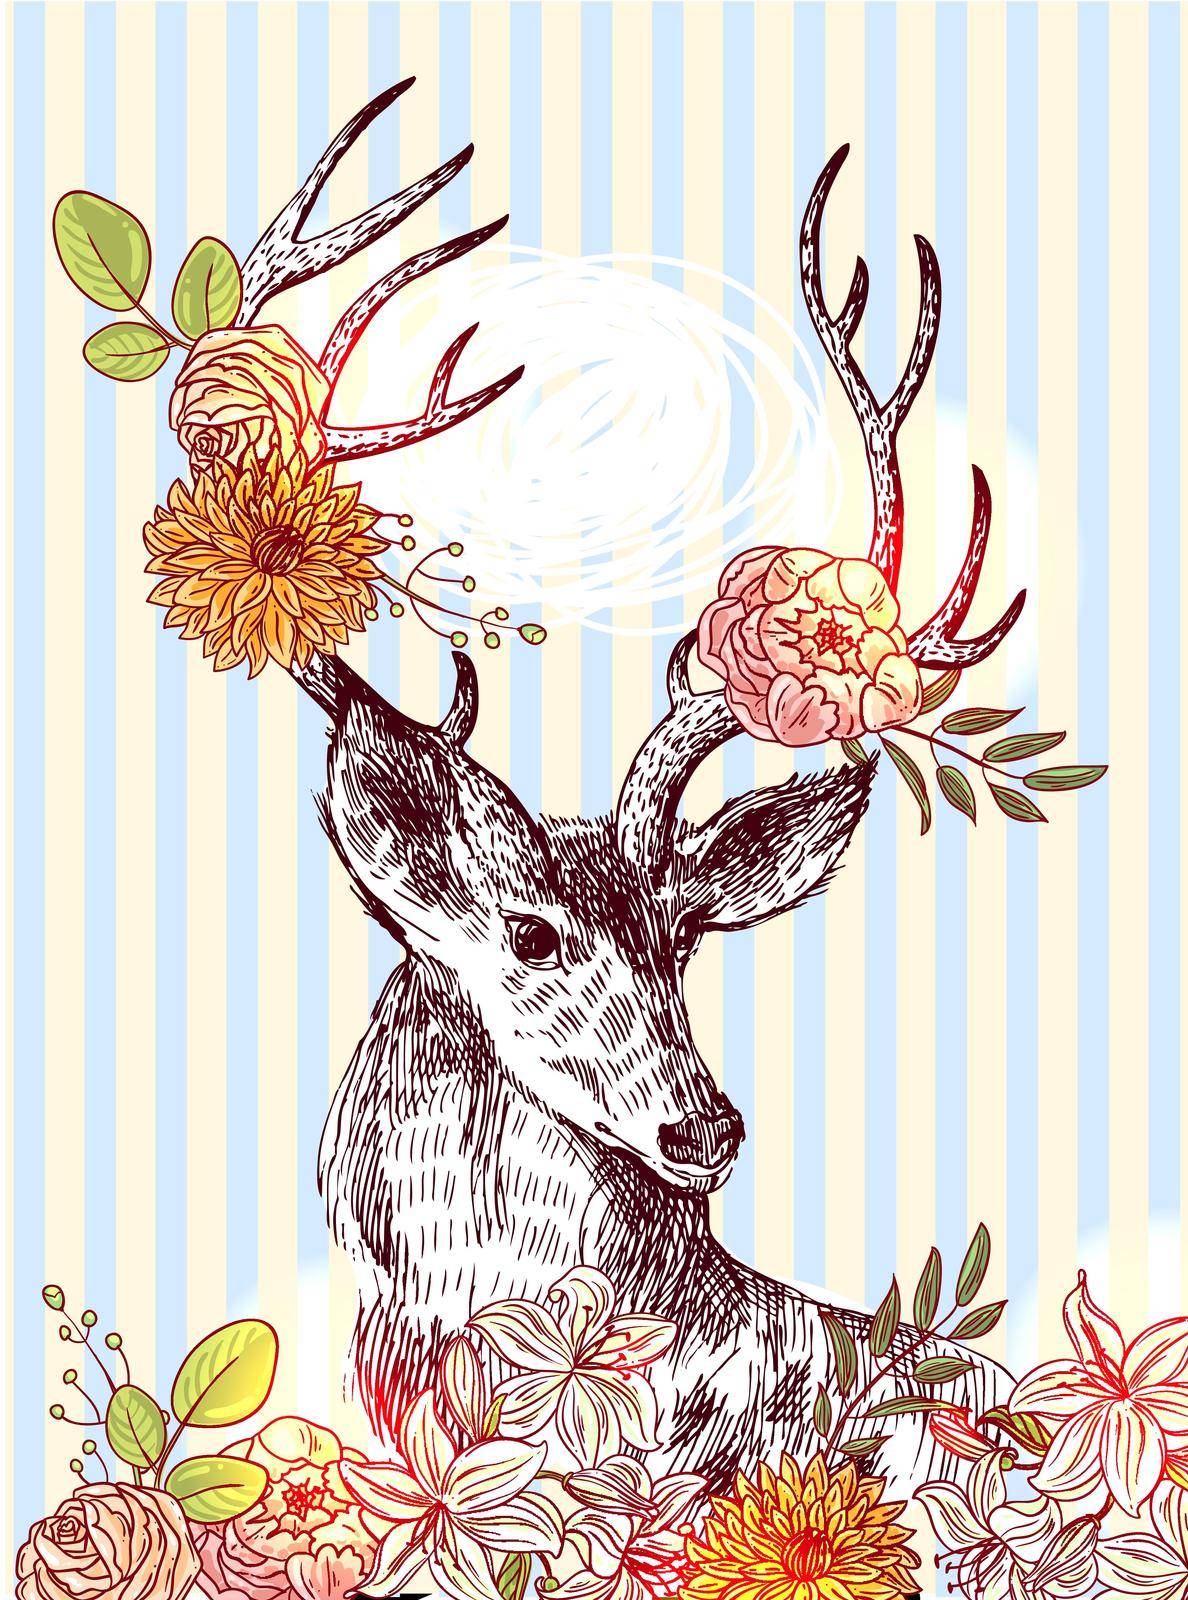 Hand drawn vector illustration sketch of deer. Boho style. Use for scrapbook, tissue, textile, cloth, fabric, web